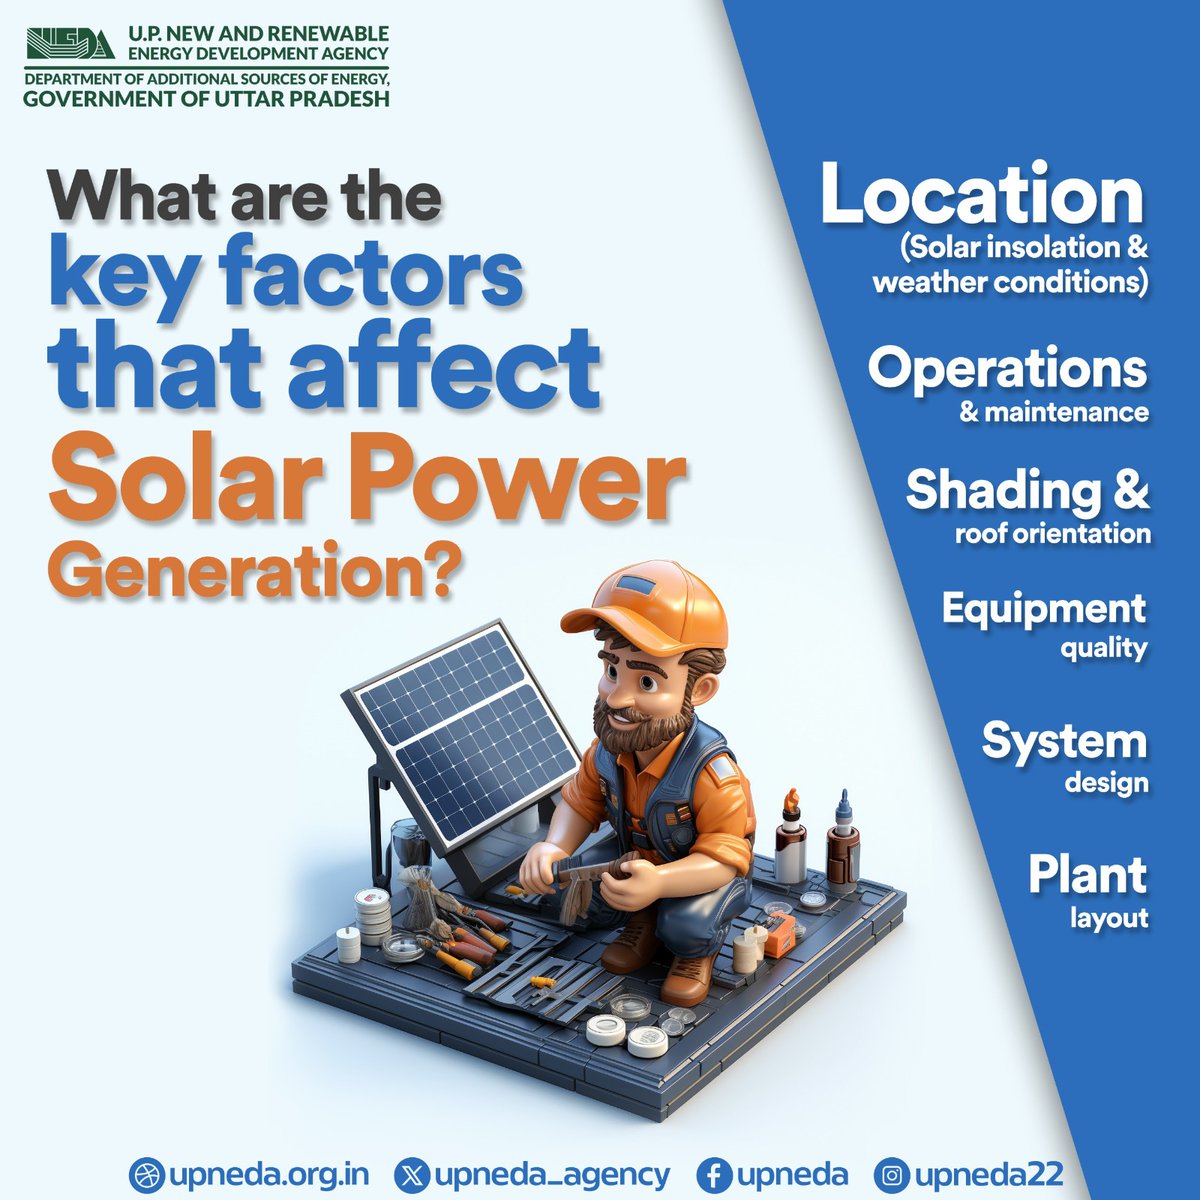 Discover the key factors impacting solar power generation! From location to equipment quality, understanding these elements is crucial for efficient solar energy utilization. 

#SolarEnergy #UPNEDA #RenewableEnergy 
#SolarPower #Sustainability #upneda_agency
@CMOfficeUP